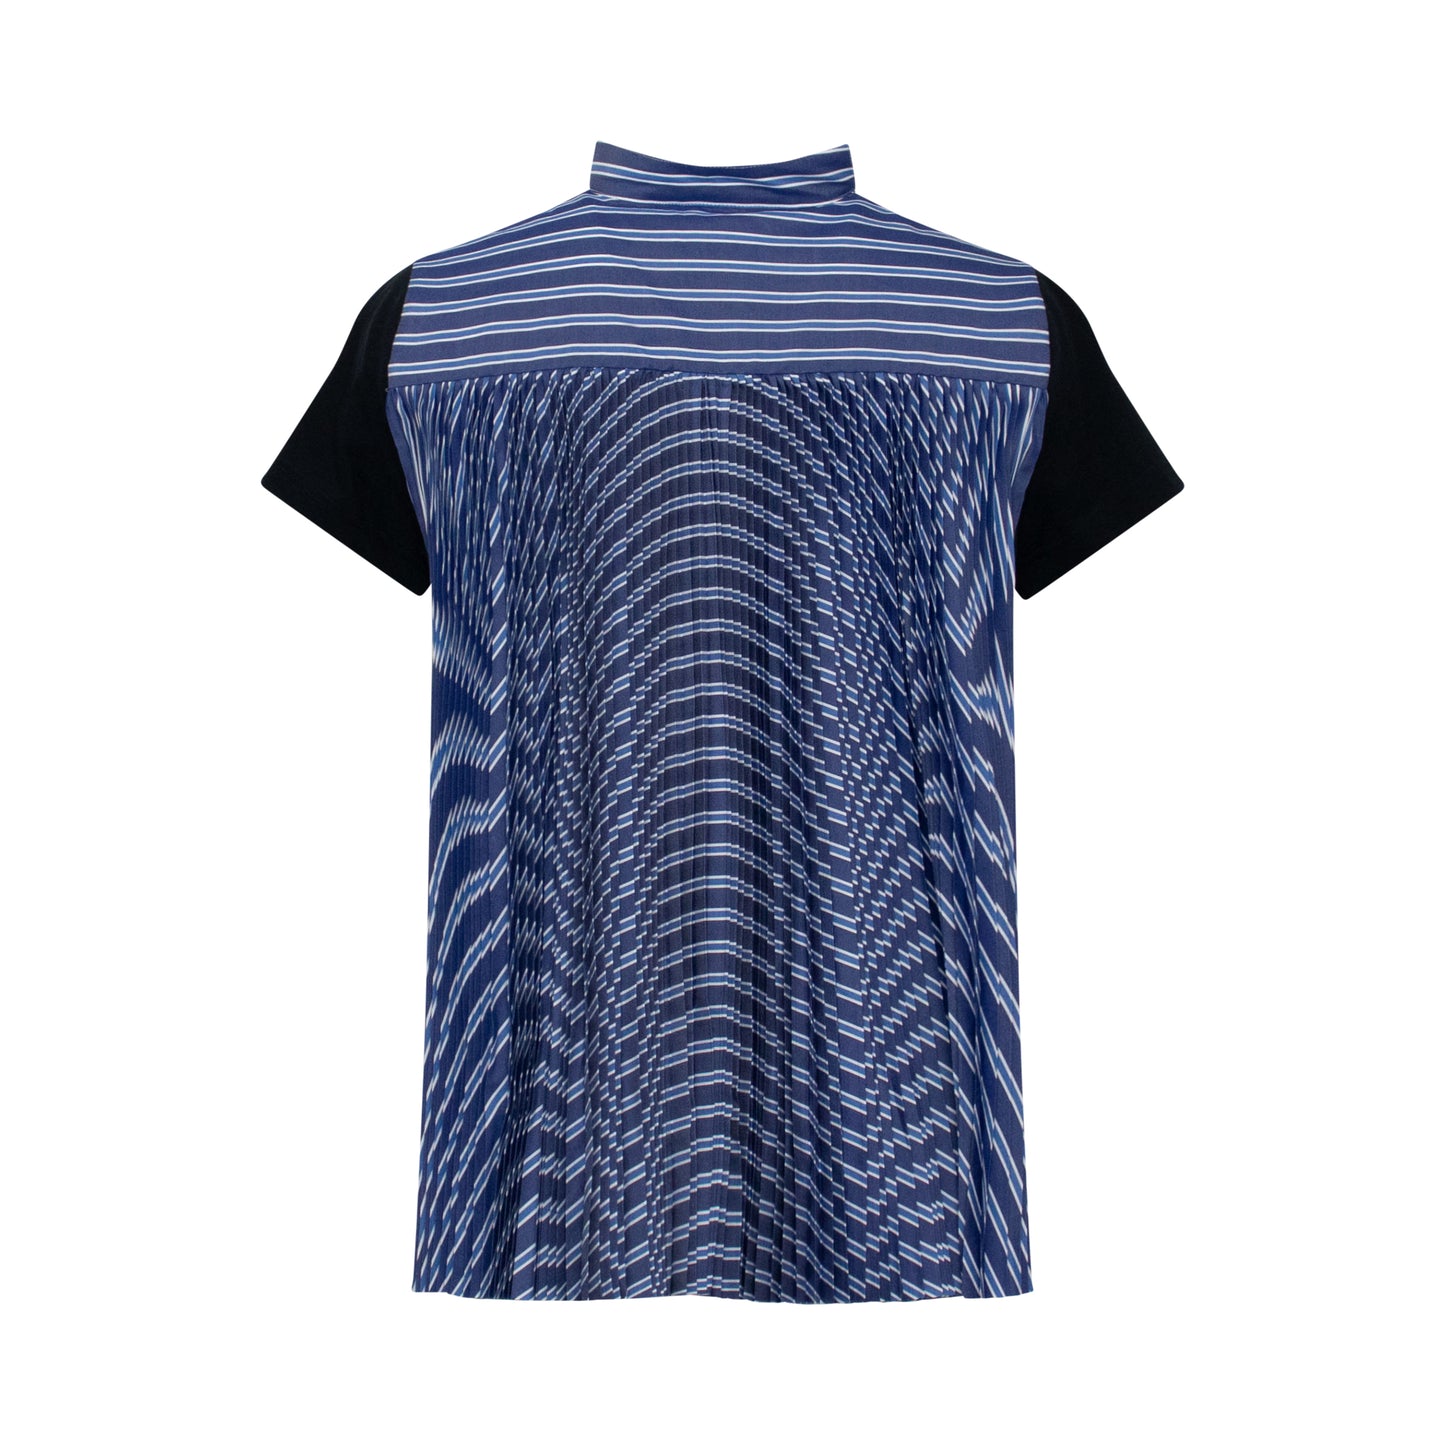 Classic Pleated Back T-Shirt in Navy